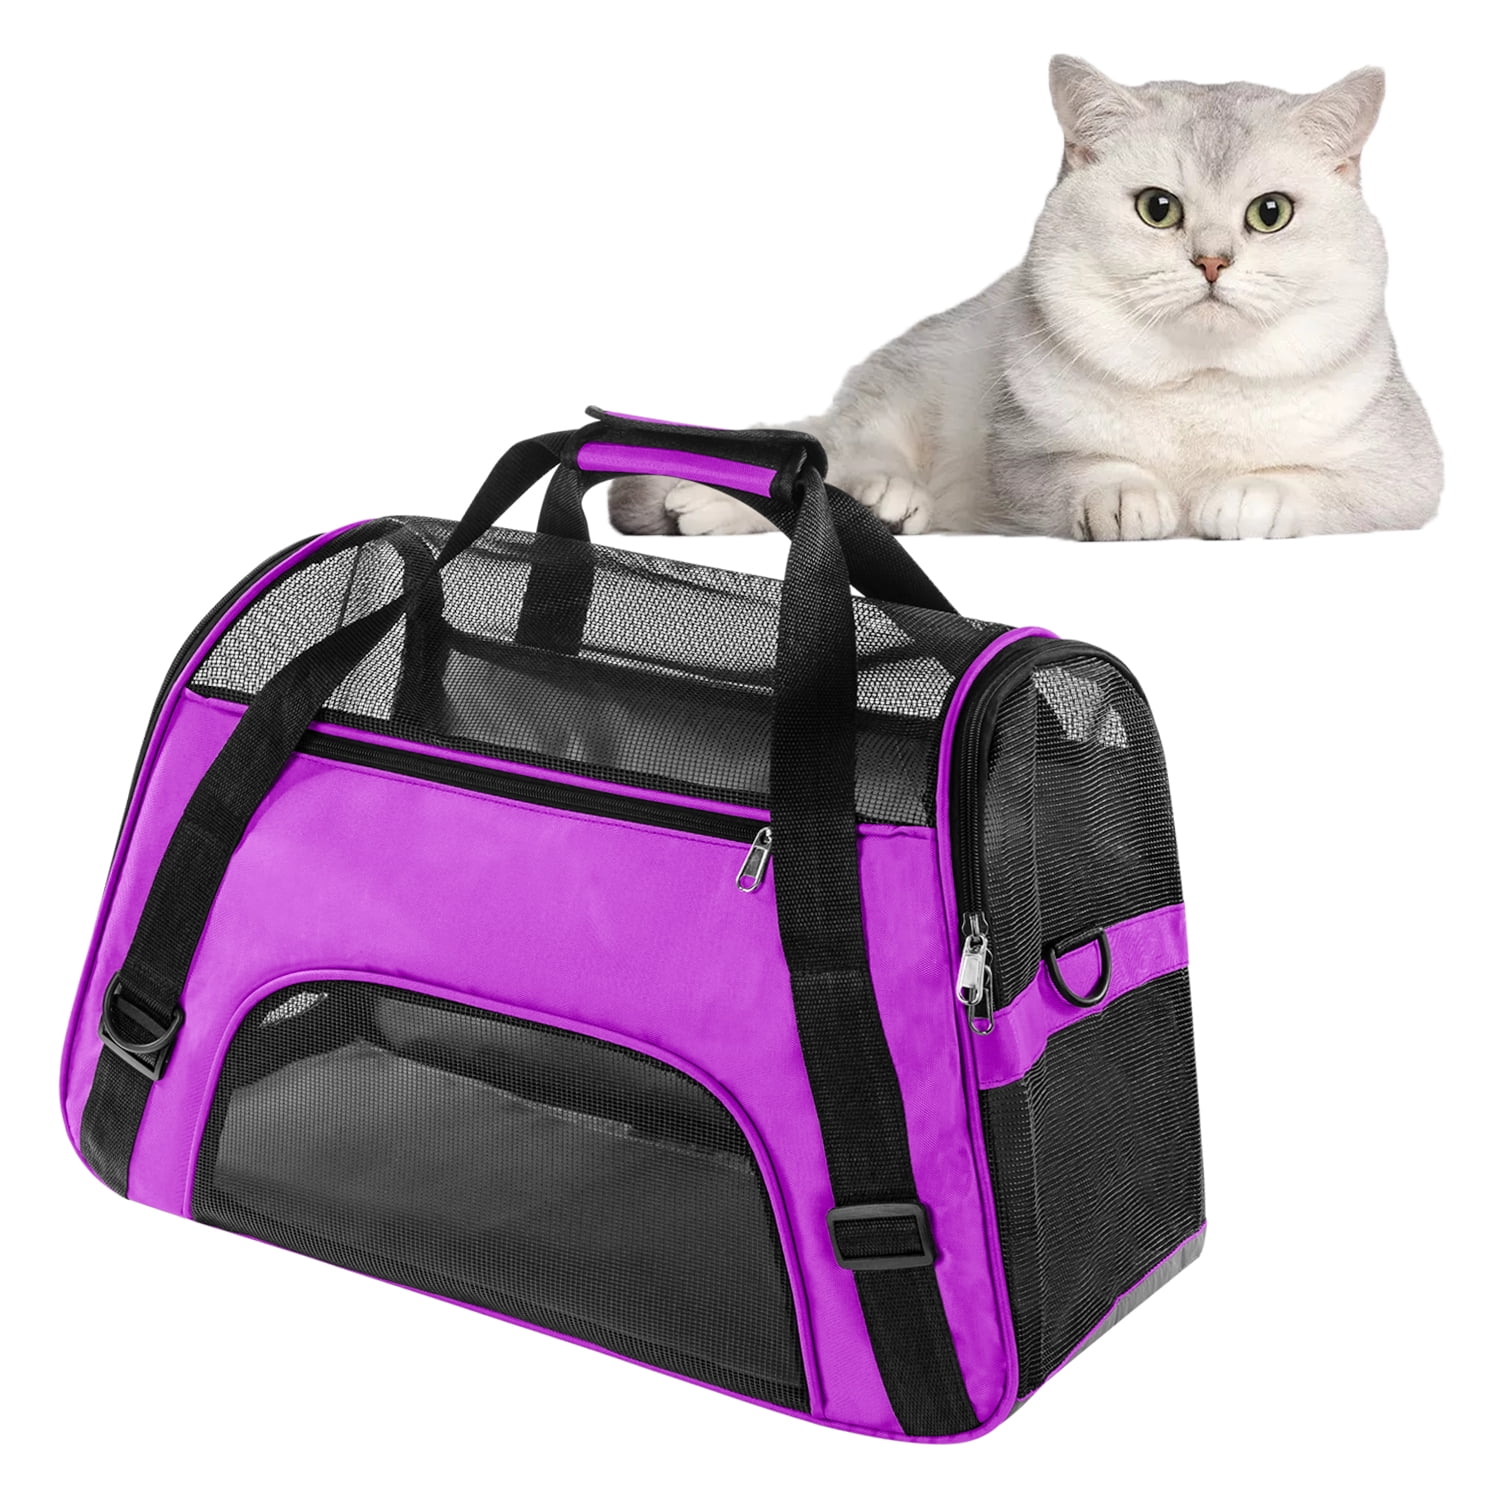 WDM Airline Approved Cat Carrier Removable Fleece Pad and Pockets for Small Dogs Puppies Large Cat Soft Sided Collapsible Puppy Carrier with Locking Safety Zippers 